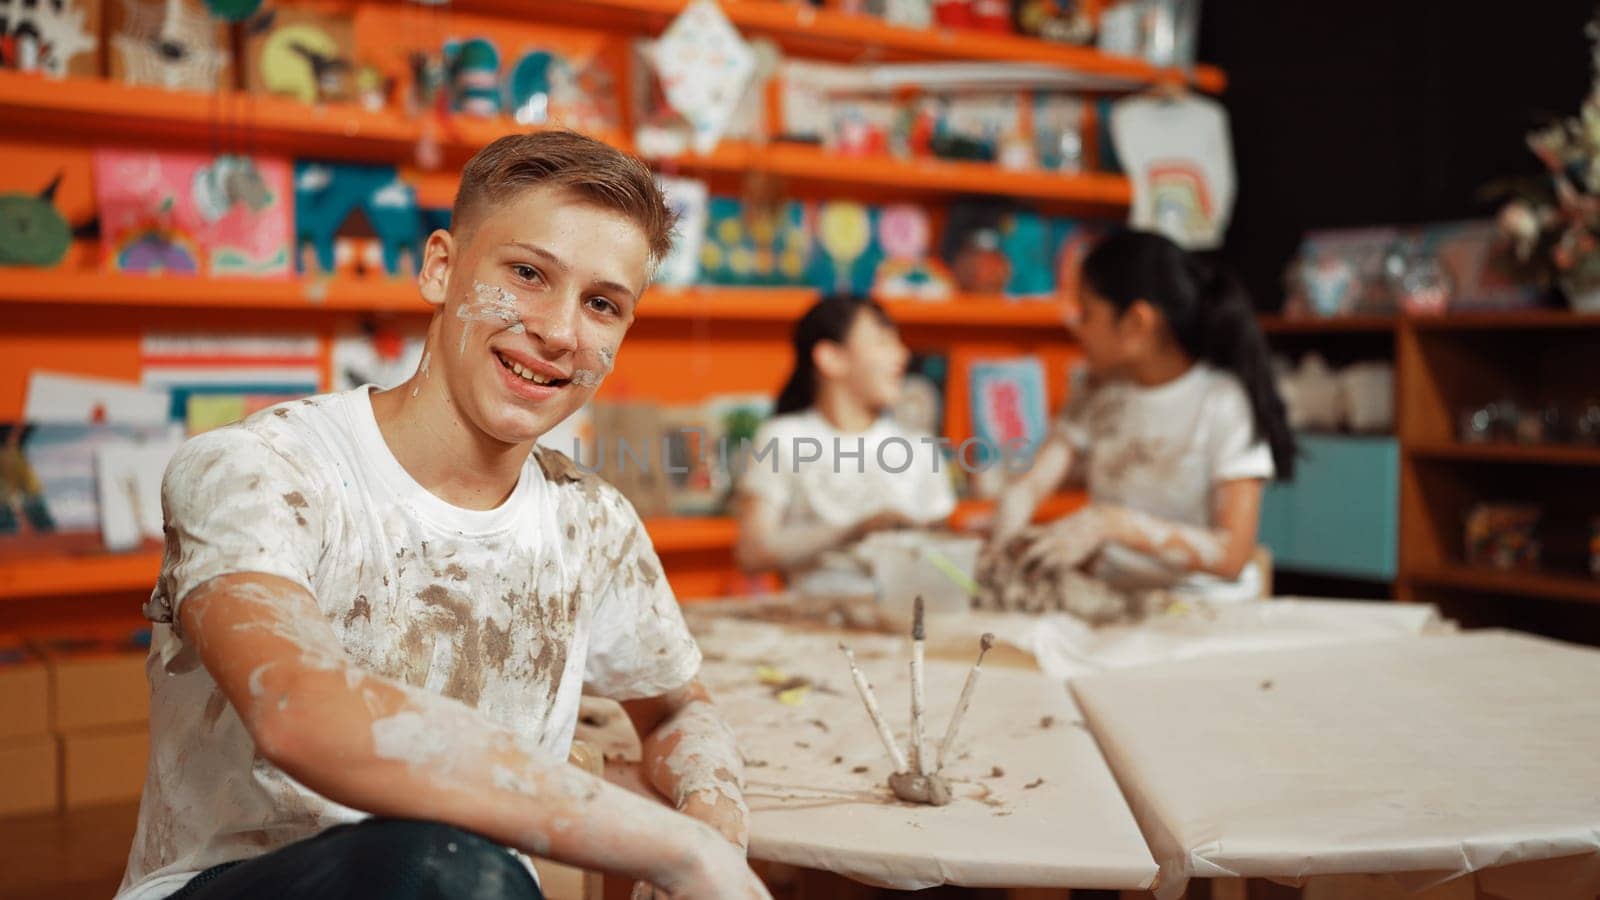 Highschool boy looking at camera while multicultural children modeling clay. Diverse student having pottery class together. Child smile while wearing white shirt with mud stained cloth. Edification.